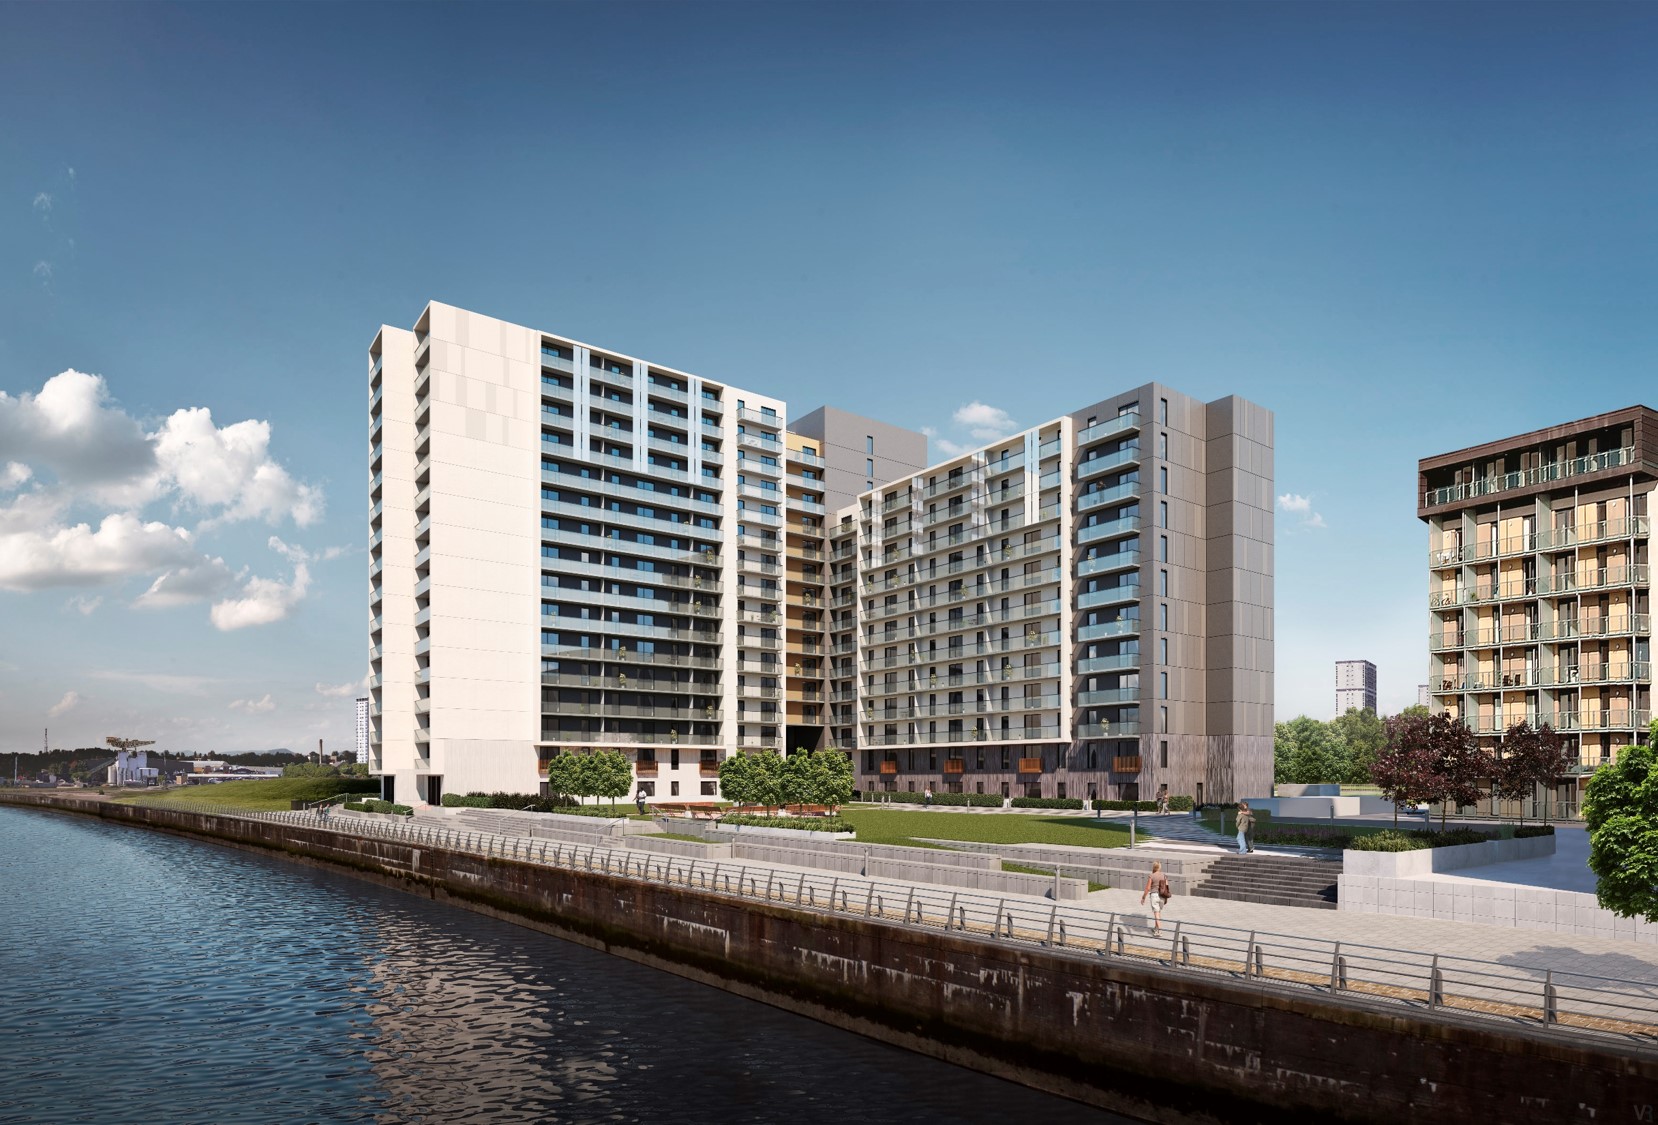 Dandara secures £60m credit facility from HSBC for green Build to Rent projects